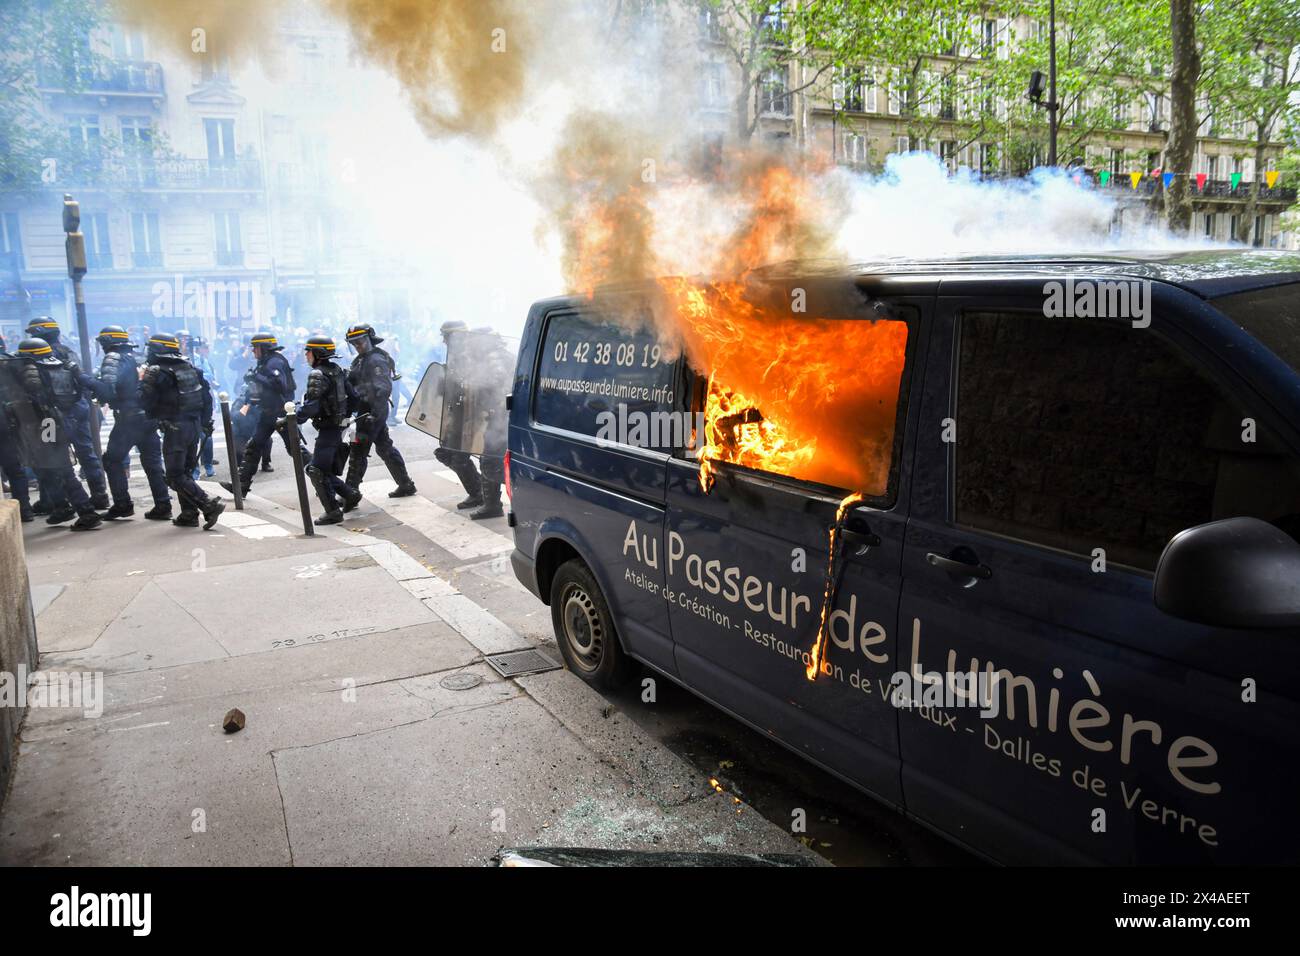 Paris,France,1st of May 2024.Thousands of people protested and celebrated on mayday in Paris.  Labour unions,workers,students and others marched through the streets. Some protesters turned violent,started fires and destroyed businesses.Credit:Pmvfoto/Alamy Live News Stock Photo